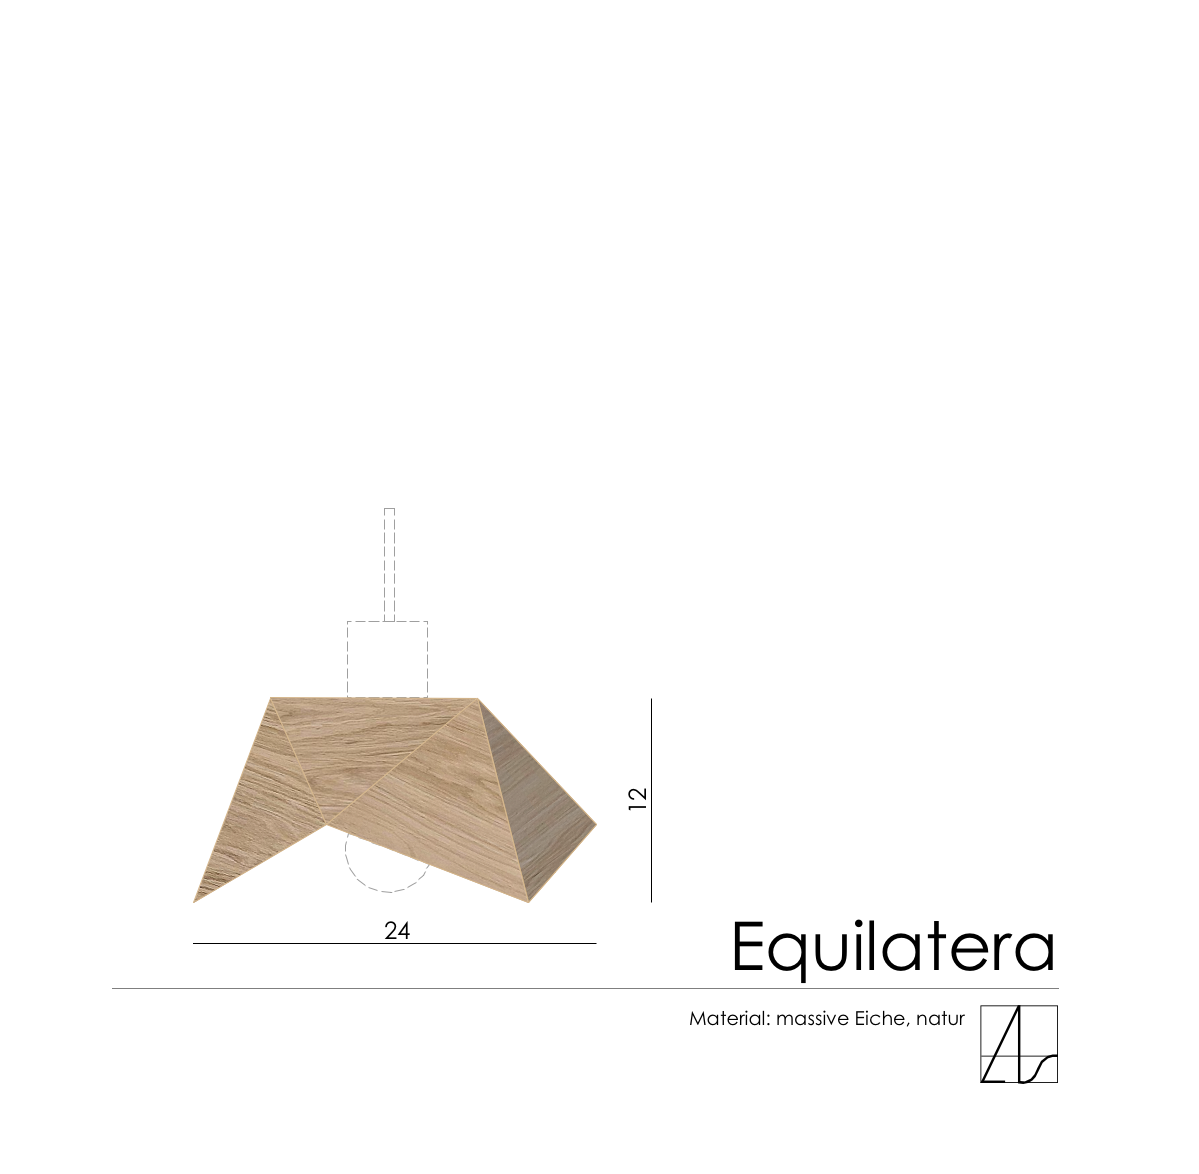 Equilatera